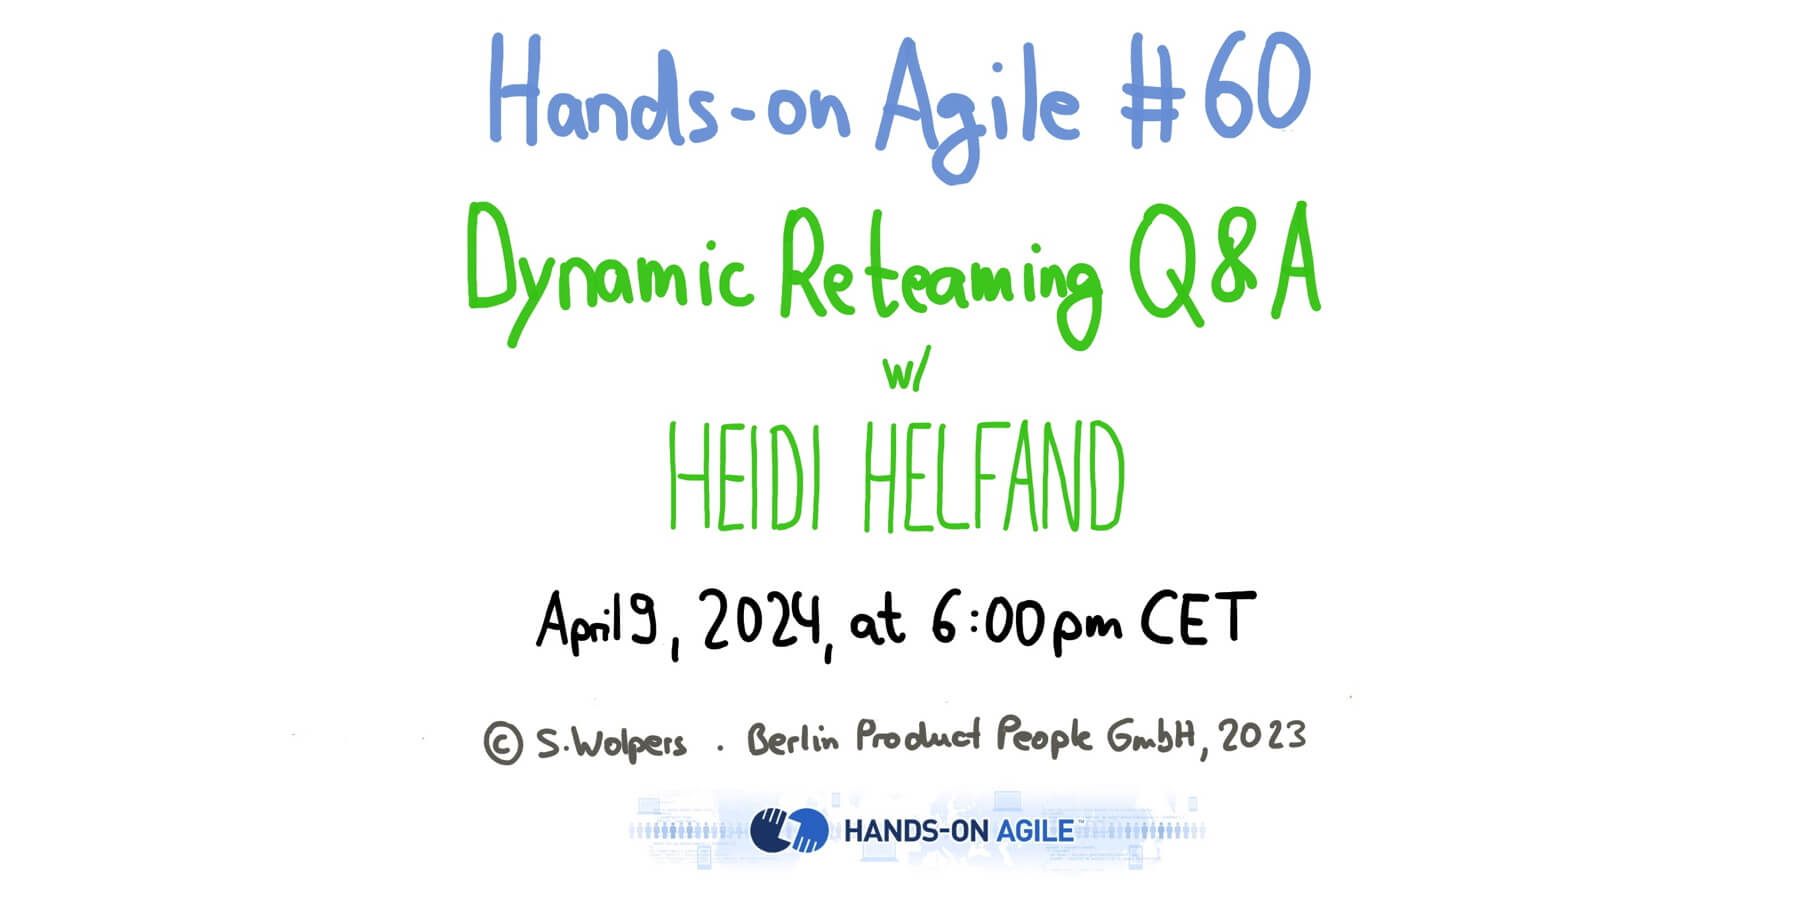 Hands-on Agile #60, April 9, 2024: A Q&A on Dynamic Reteaming with Heidi Helfand — Berlin-Product-People.com